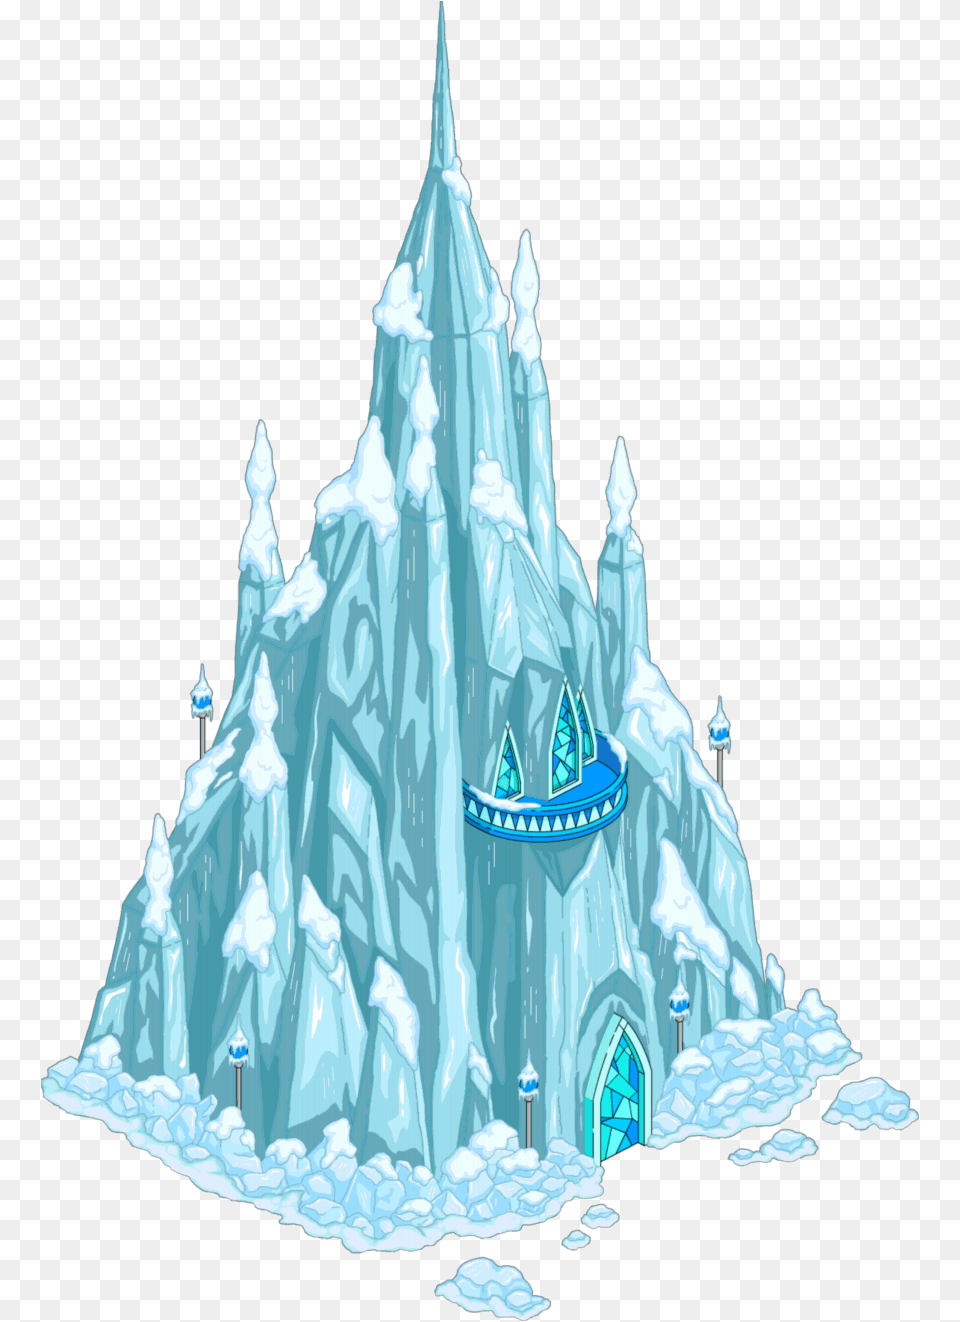 Frozen Castle Adventure Time Ice King Castle, Nature, Outdoors, Mountain, Iceberg Free Png